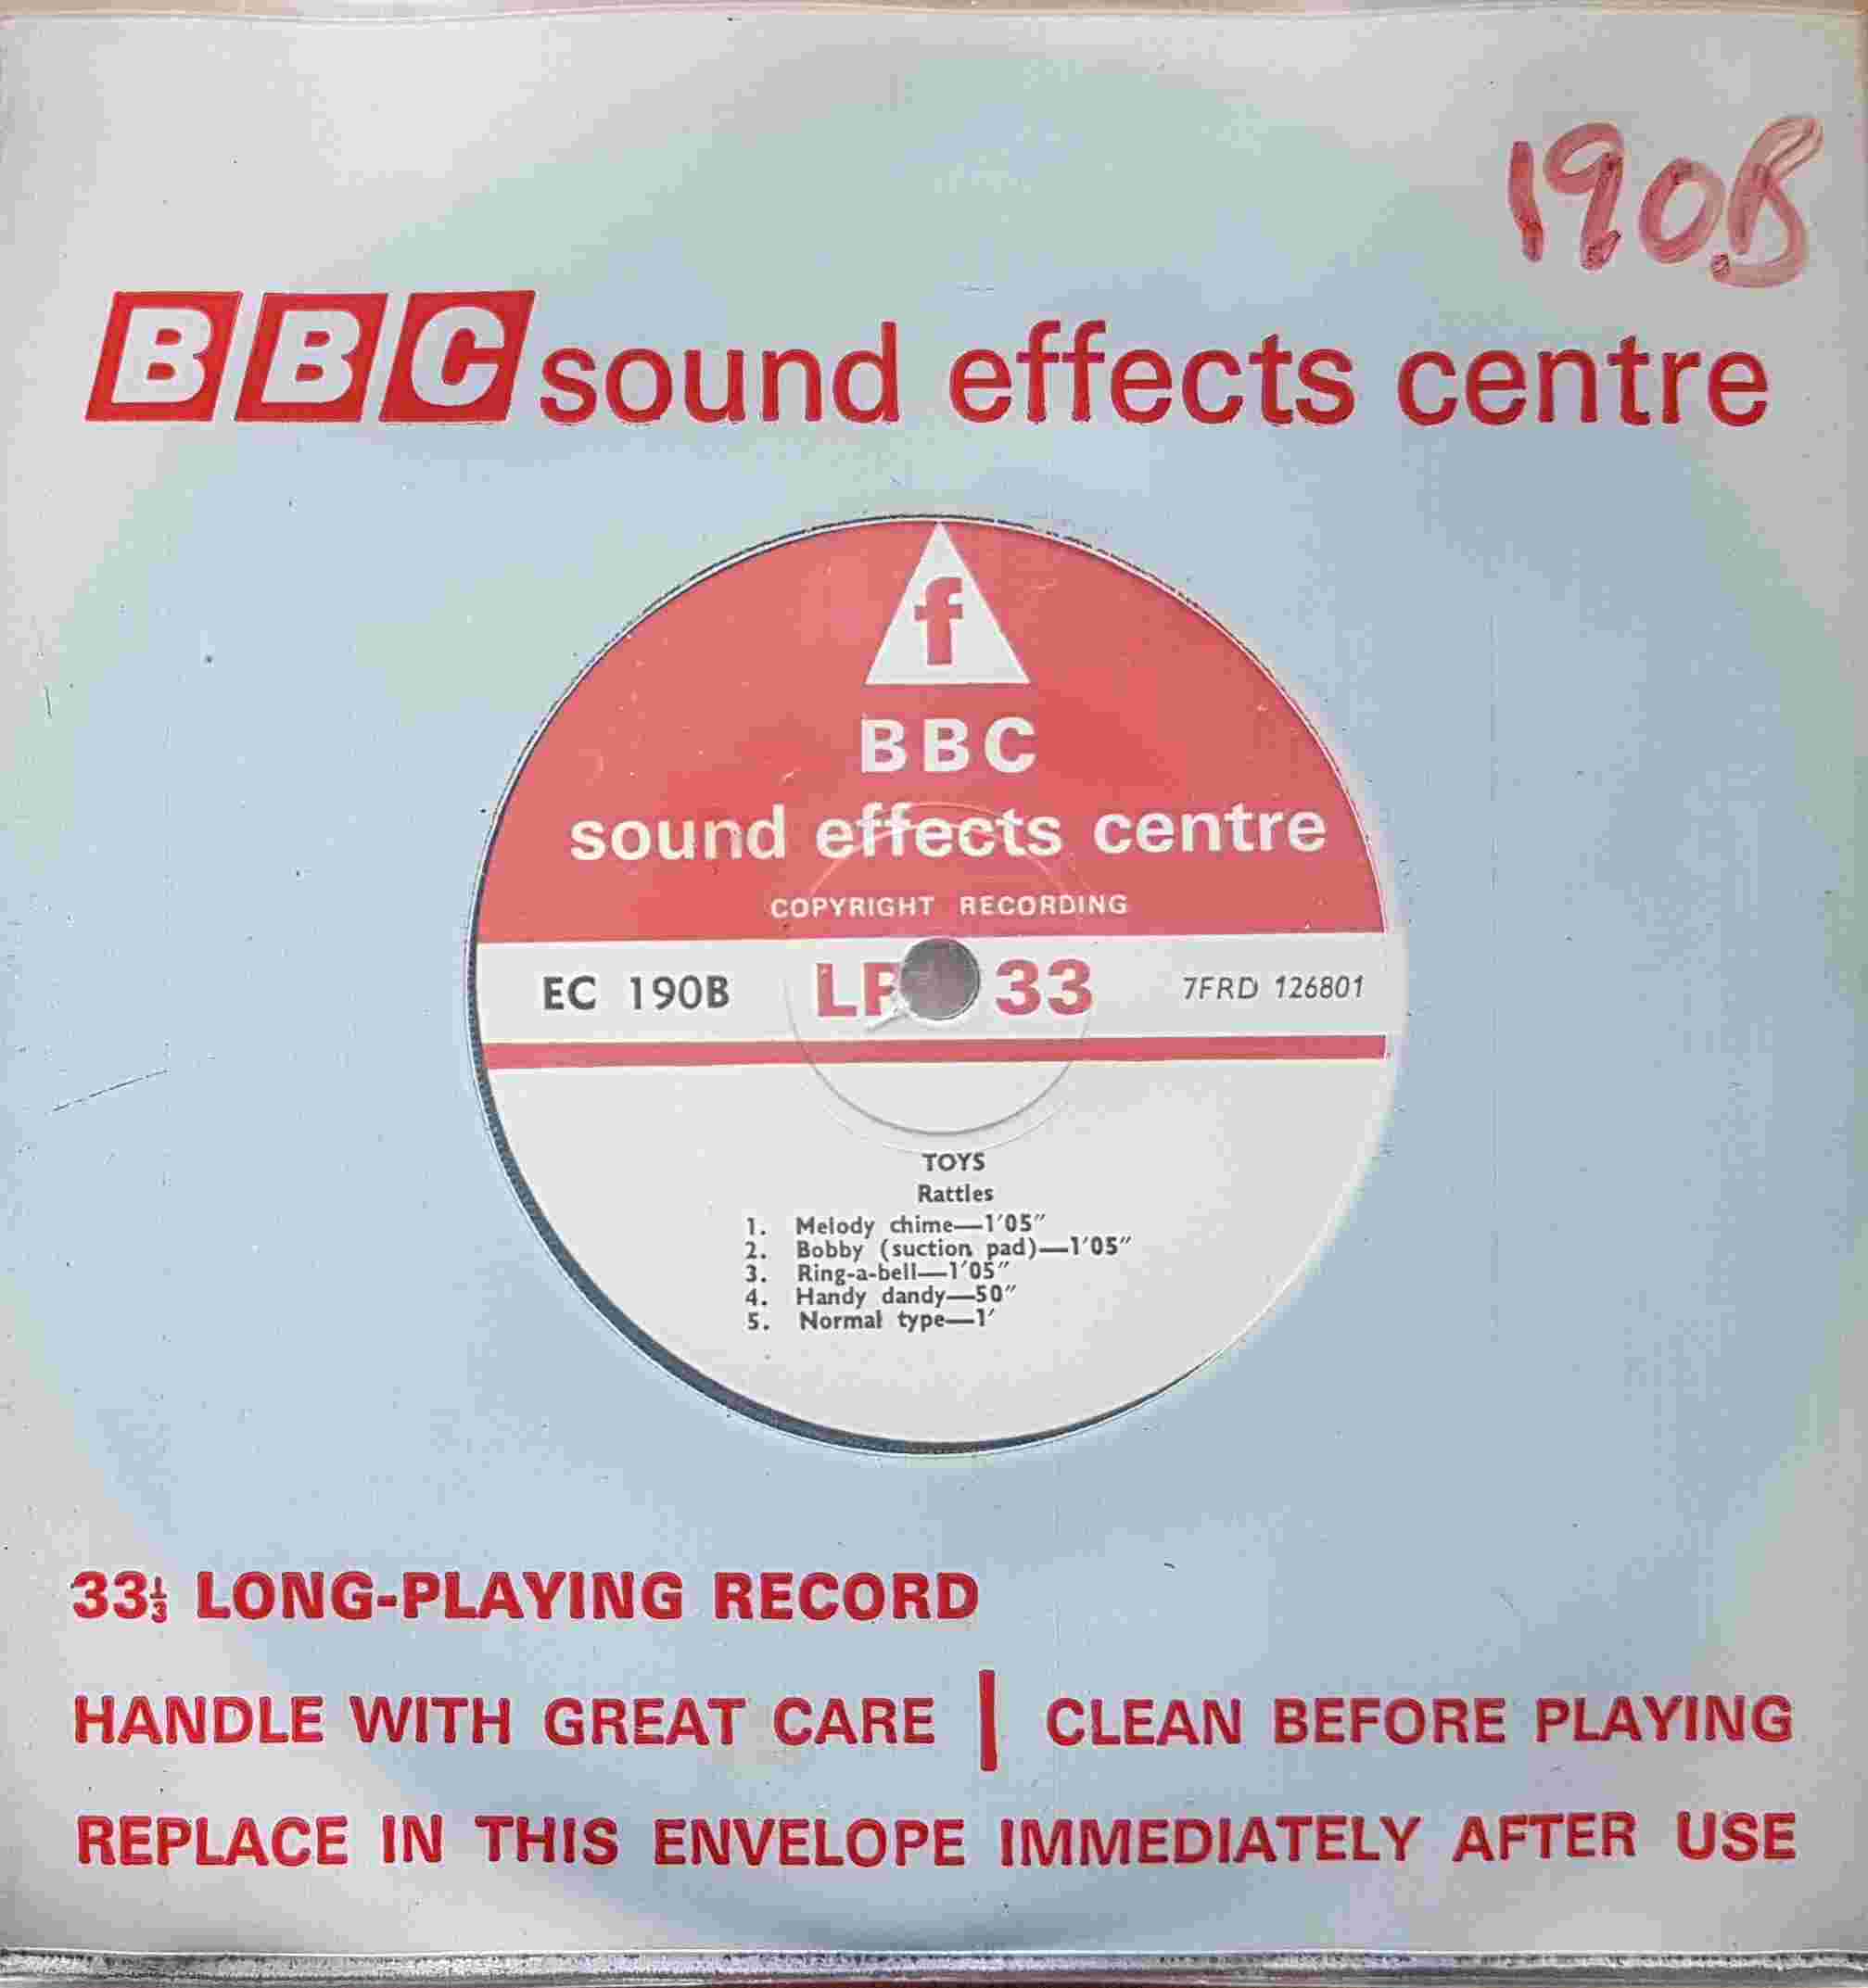 Picture of EC 190B Toys by artist Not registered from the BBC records and Tapes library